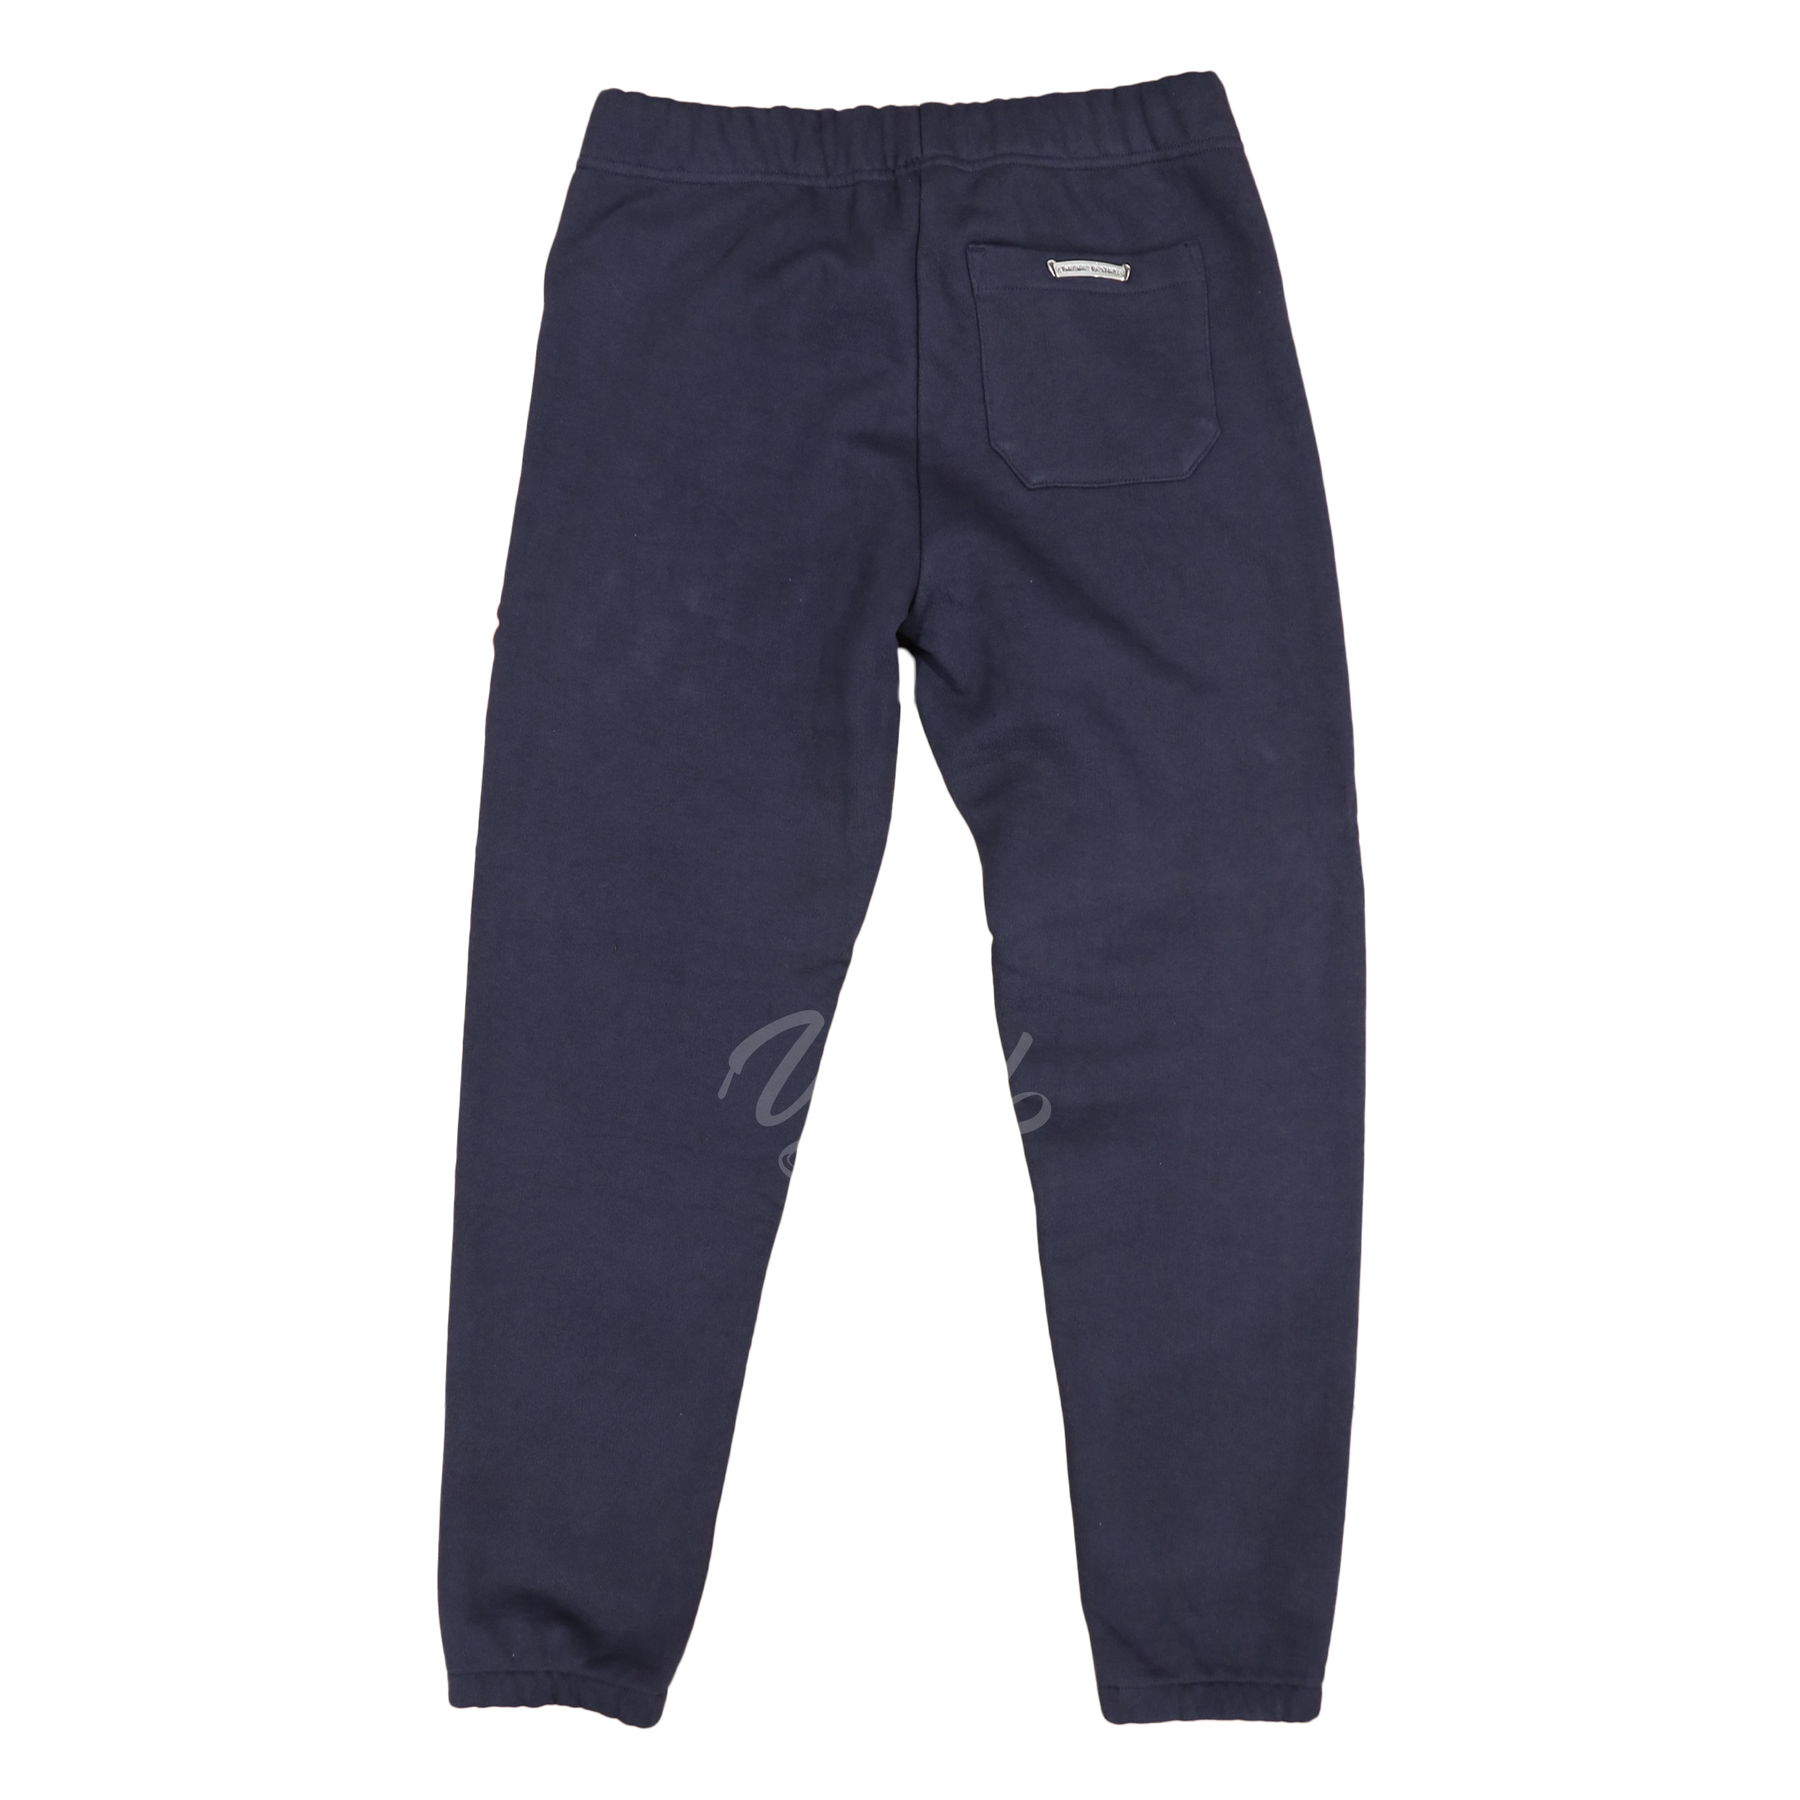 Chrome Hearts Cemetery Sweatpants "Navy/Red"